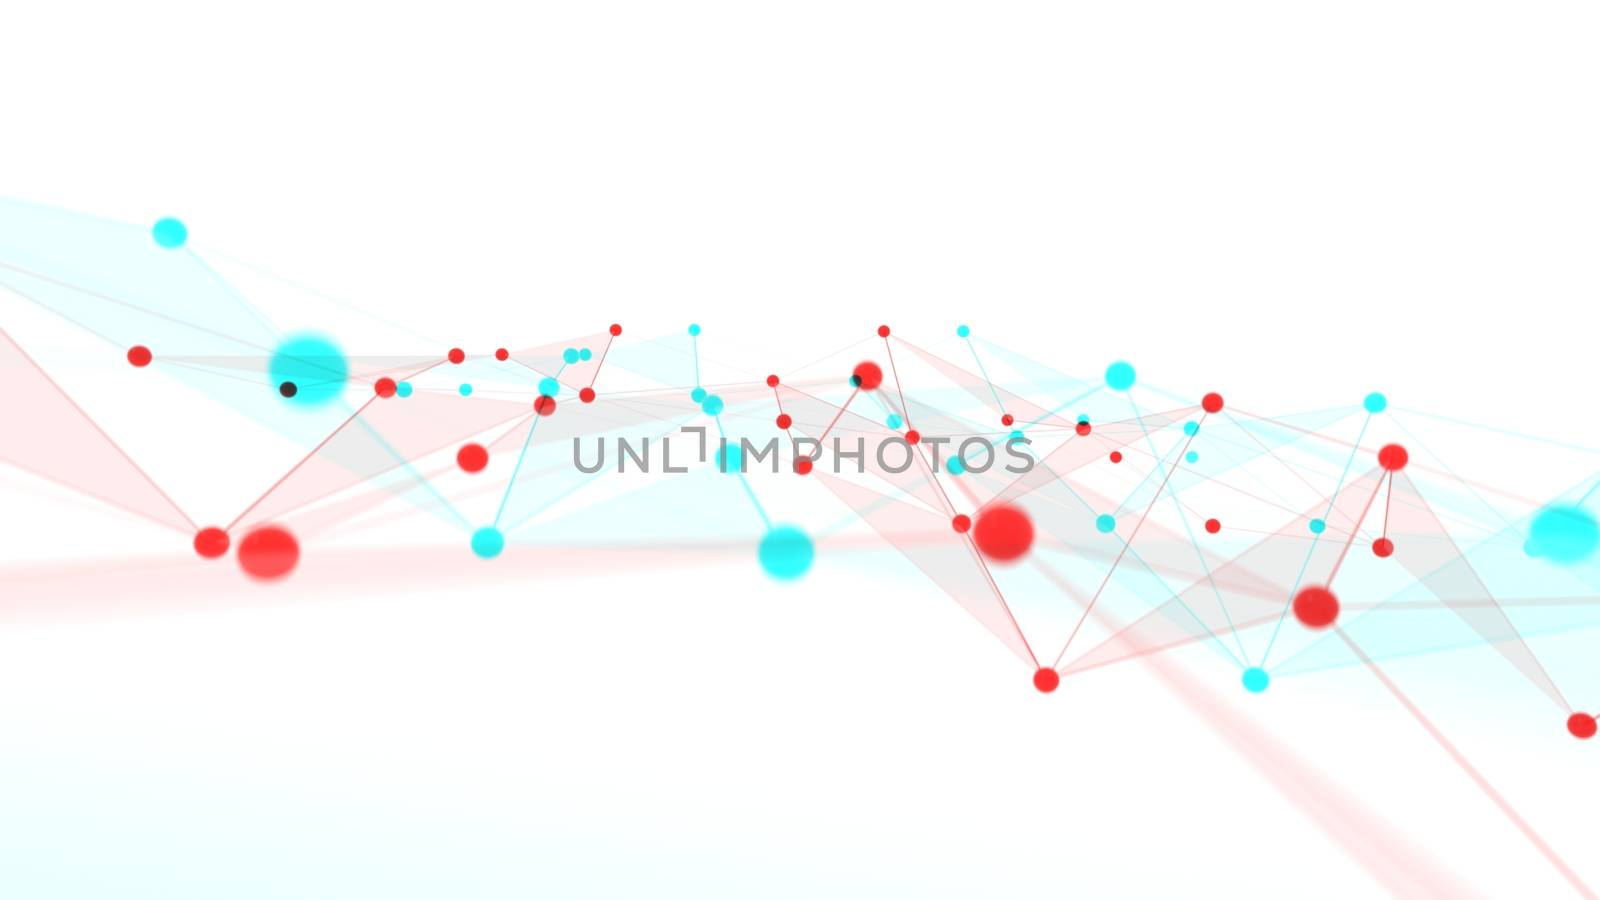 Concept of networks, science, technology or business. The points are connected by lines and transparent triangles. Large data array. 3d illustration with anaglyph effect